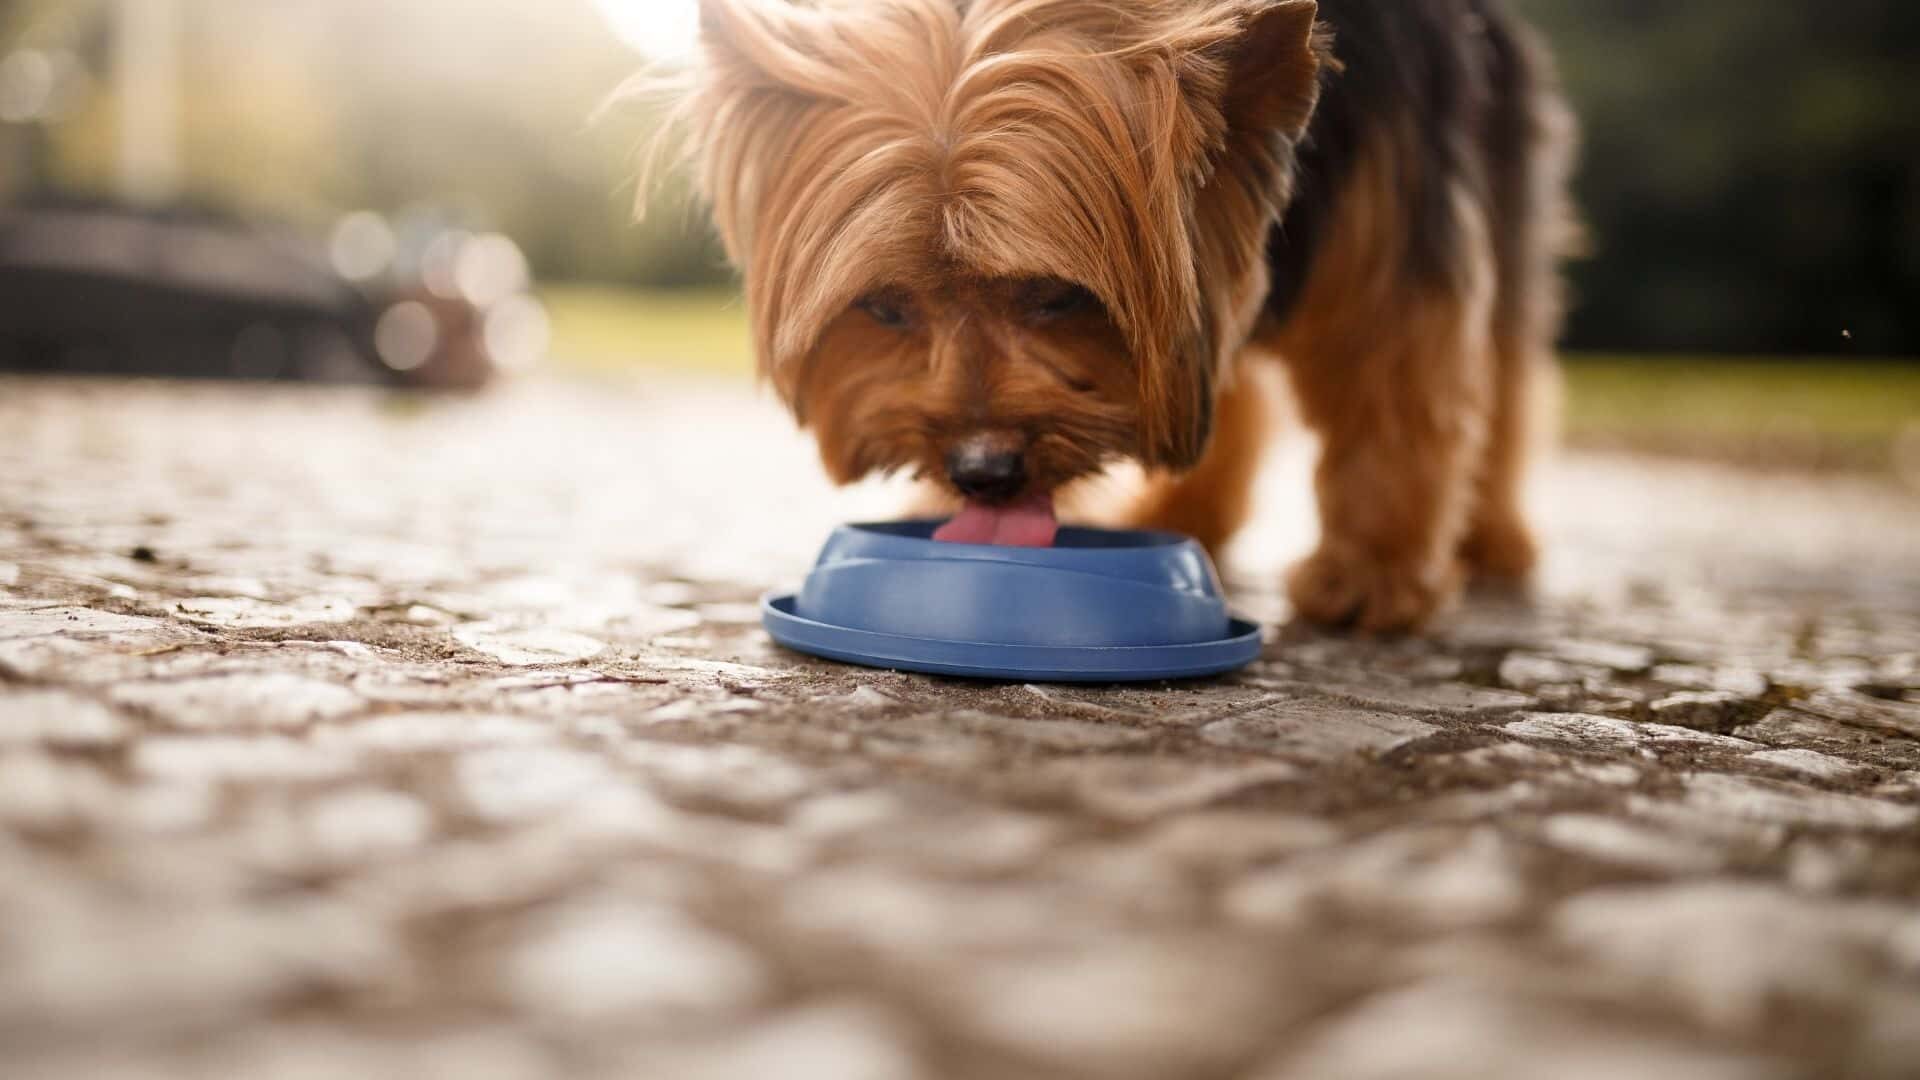 How to make your dog drink water slower?